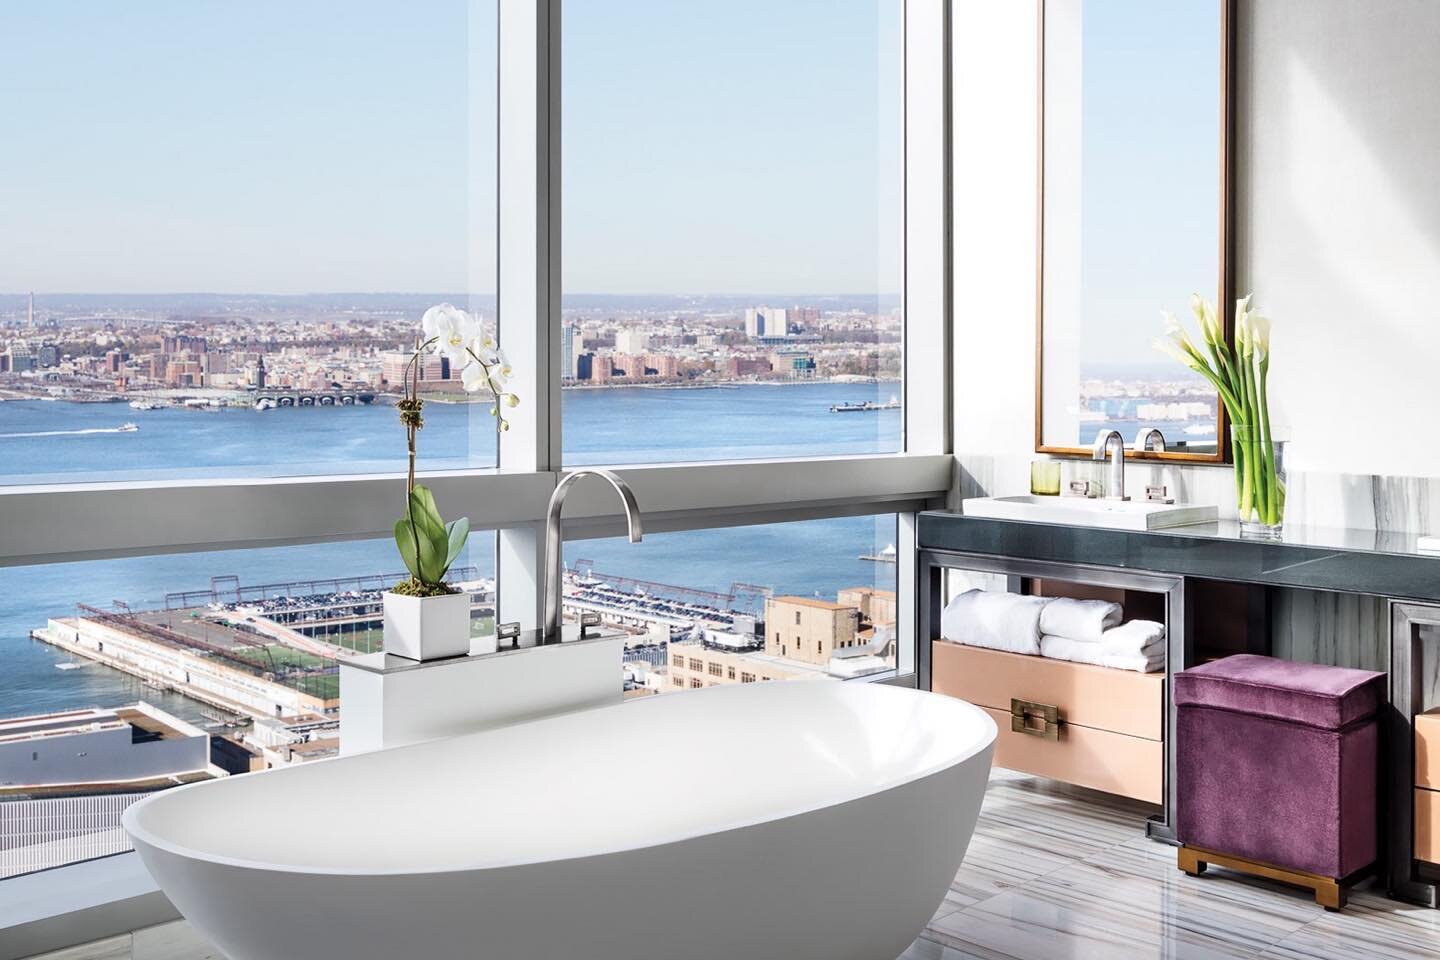 Just booked clients at the Dominick in NYC

👏🏻They will receive an upgrade on arrival (subject to availability), breakfast daily and a $100 credit at the hotel

I can do this for you too!

📱Text me at (214) 682-6976 or email amy@odysseyvoyages.com